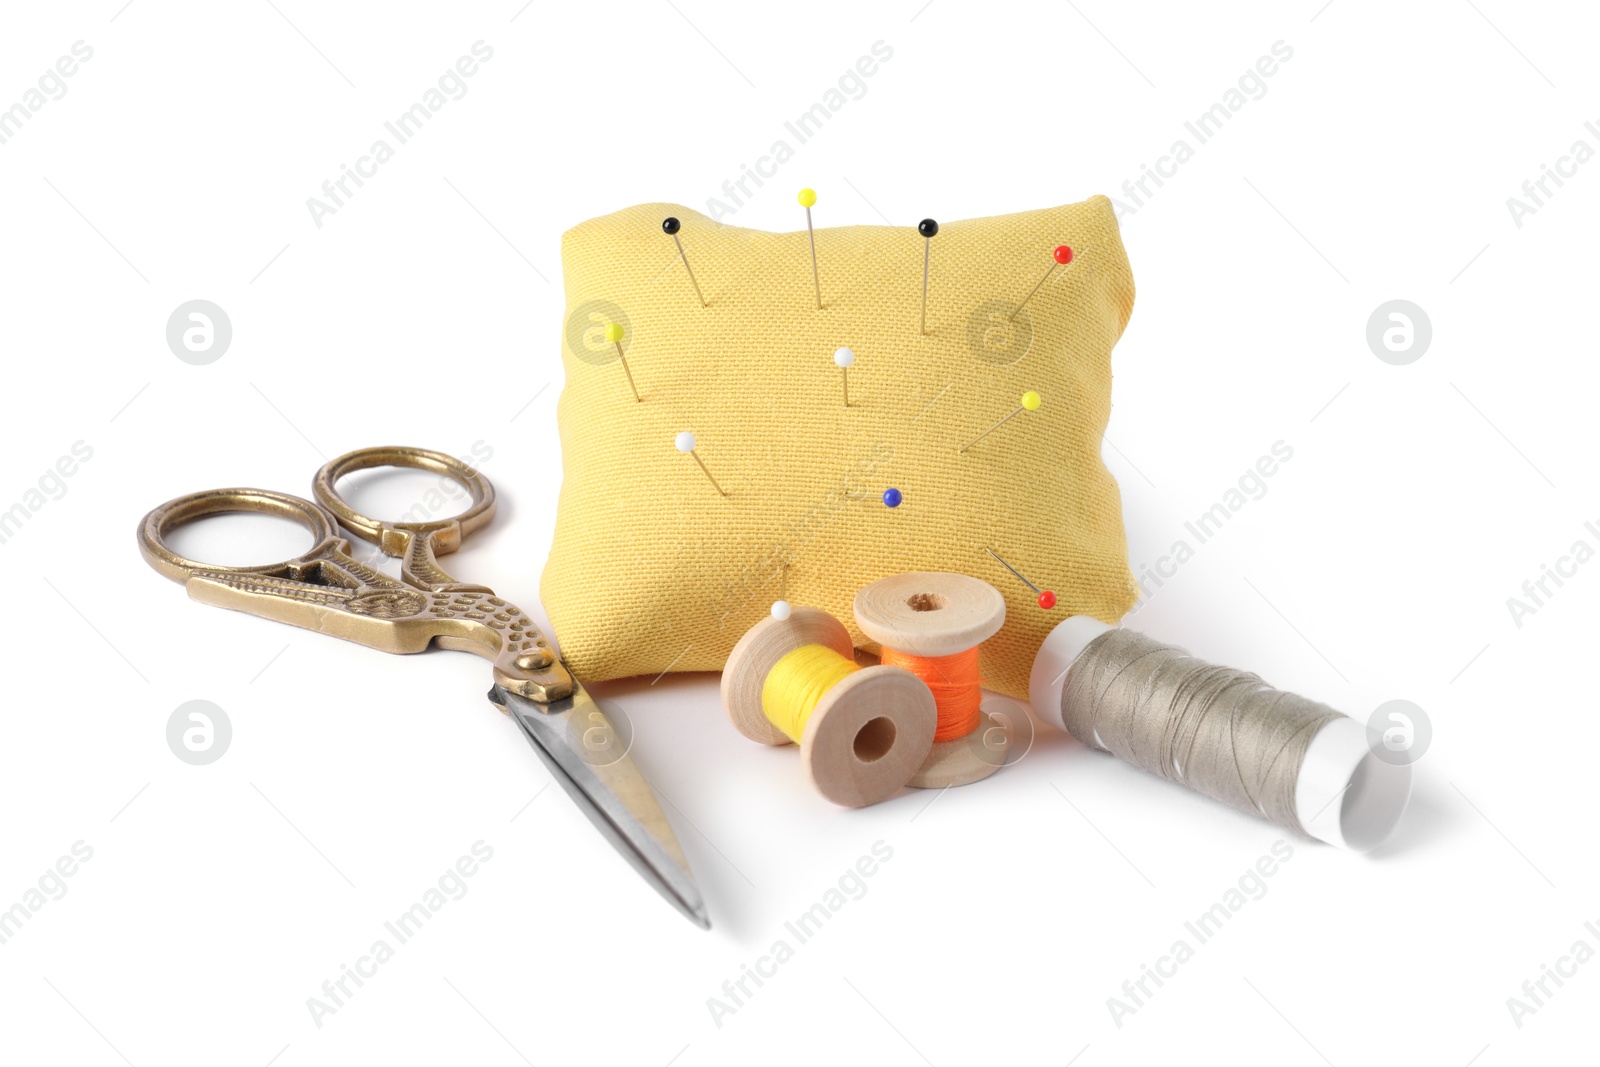 Photo of Pincushion, sewing pins, spools of threads and scissors isolated on white